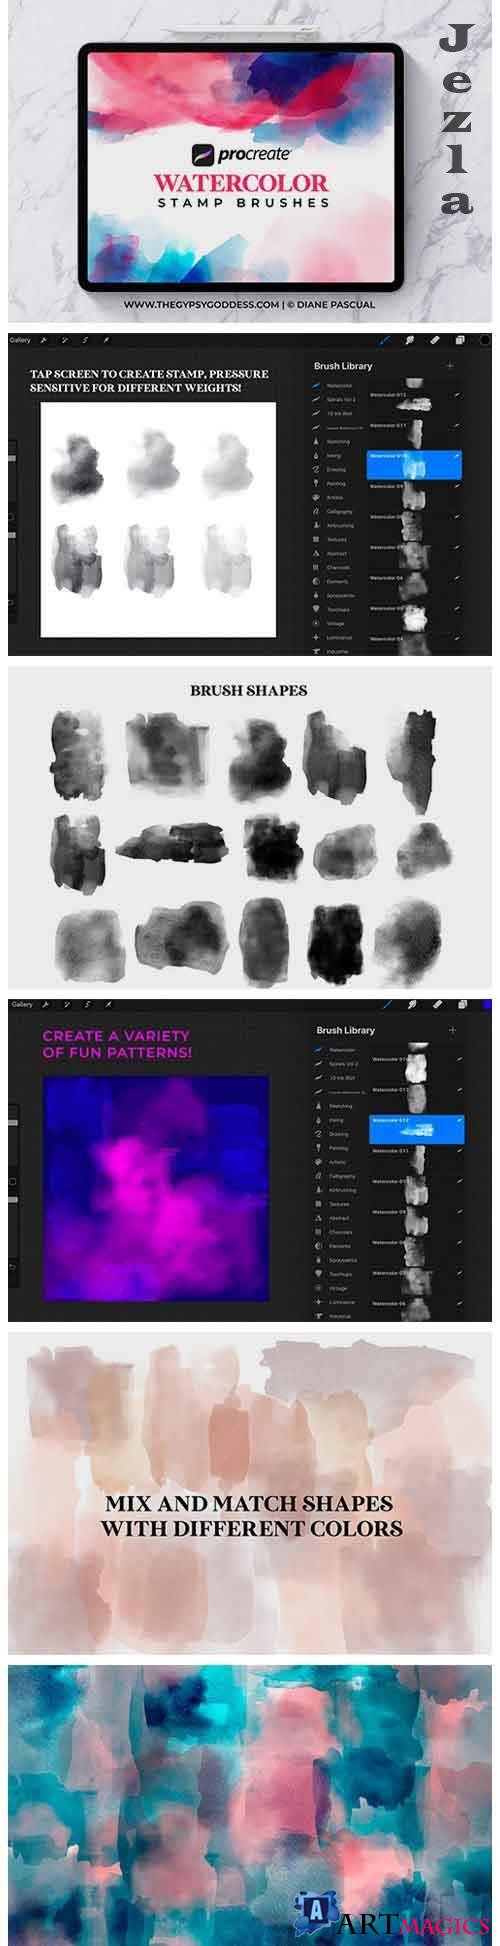 Procreate Watercolor Stamp Brushes - 4832930